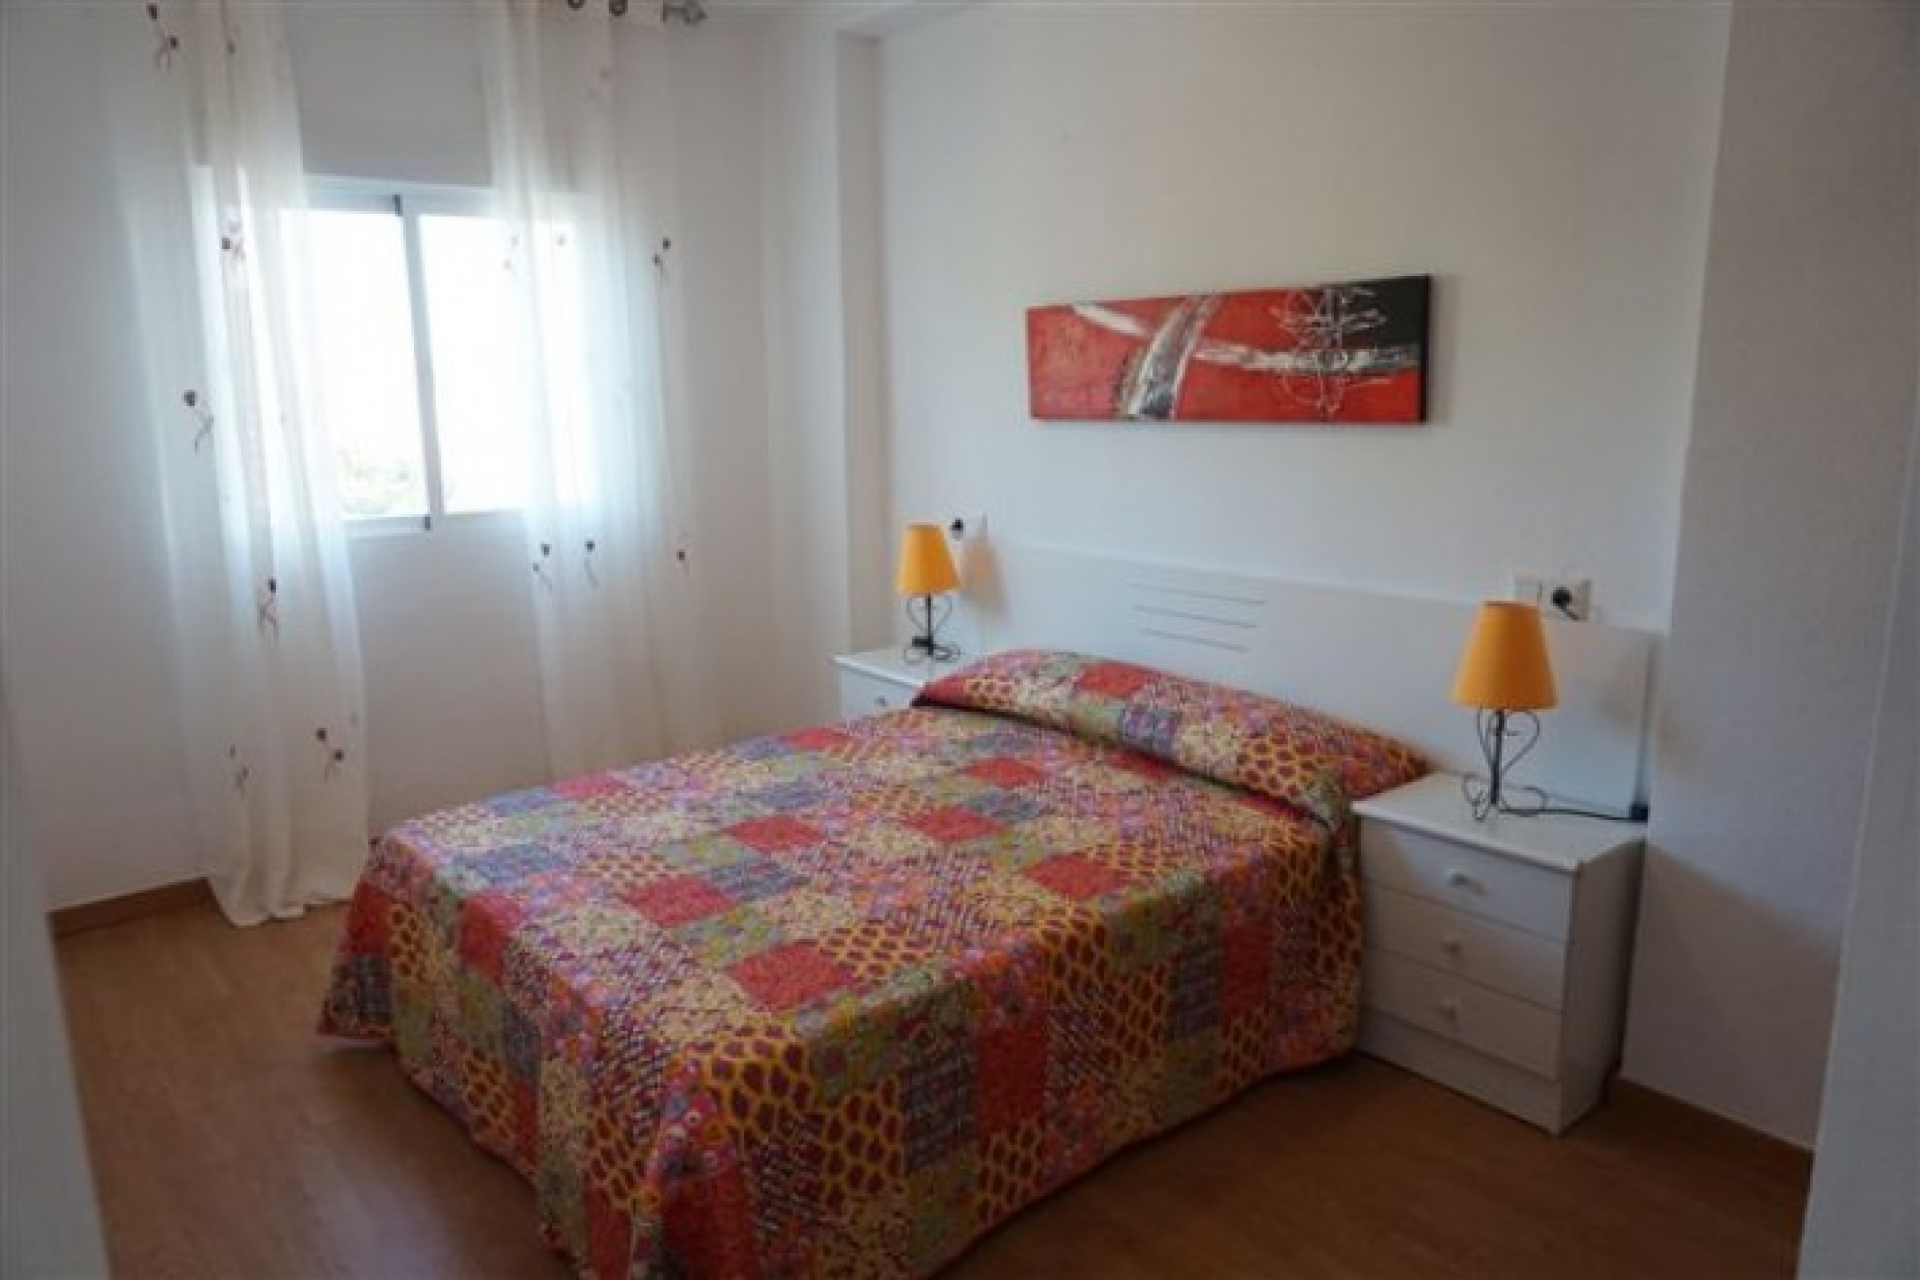 For sale cheap bargain property Costa blanca Spain